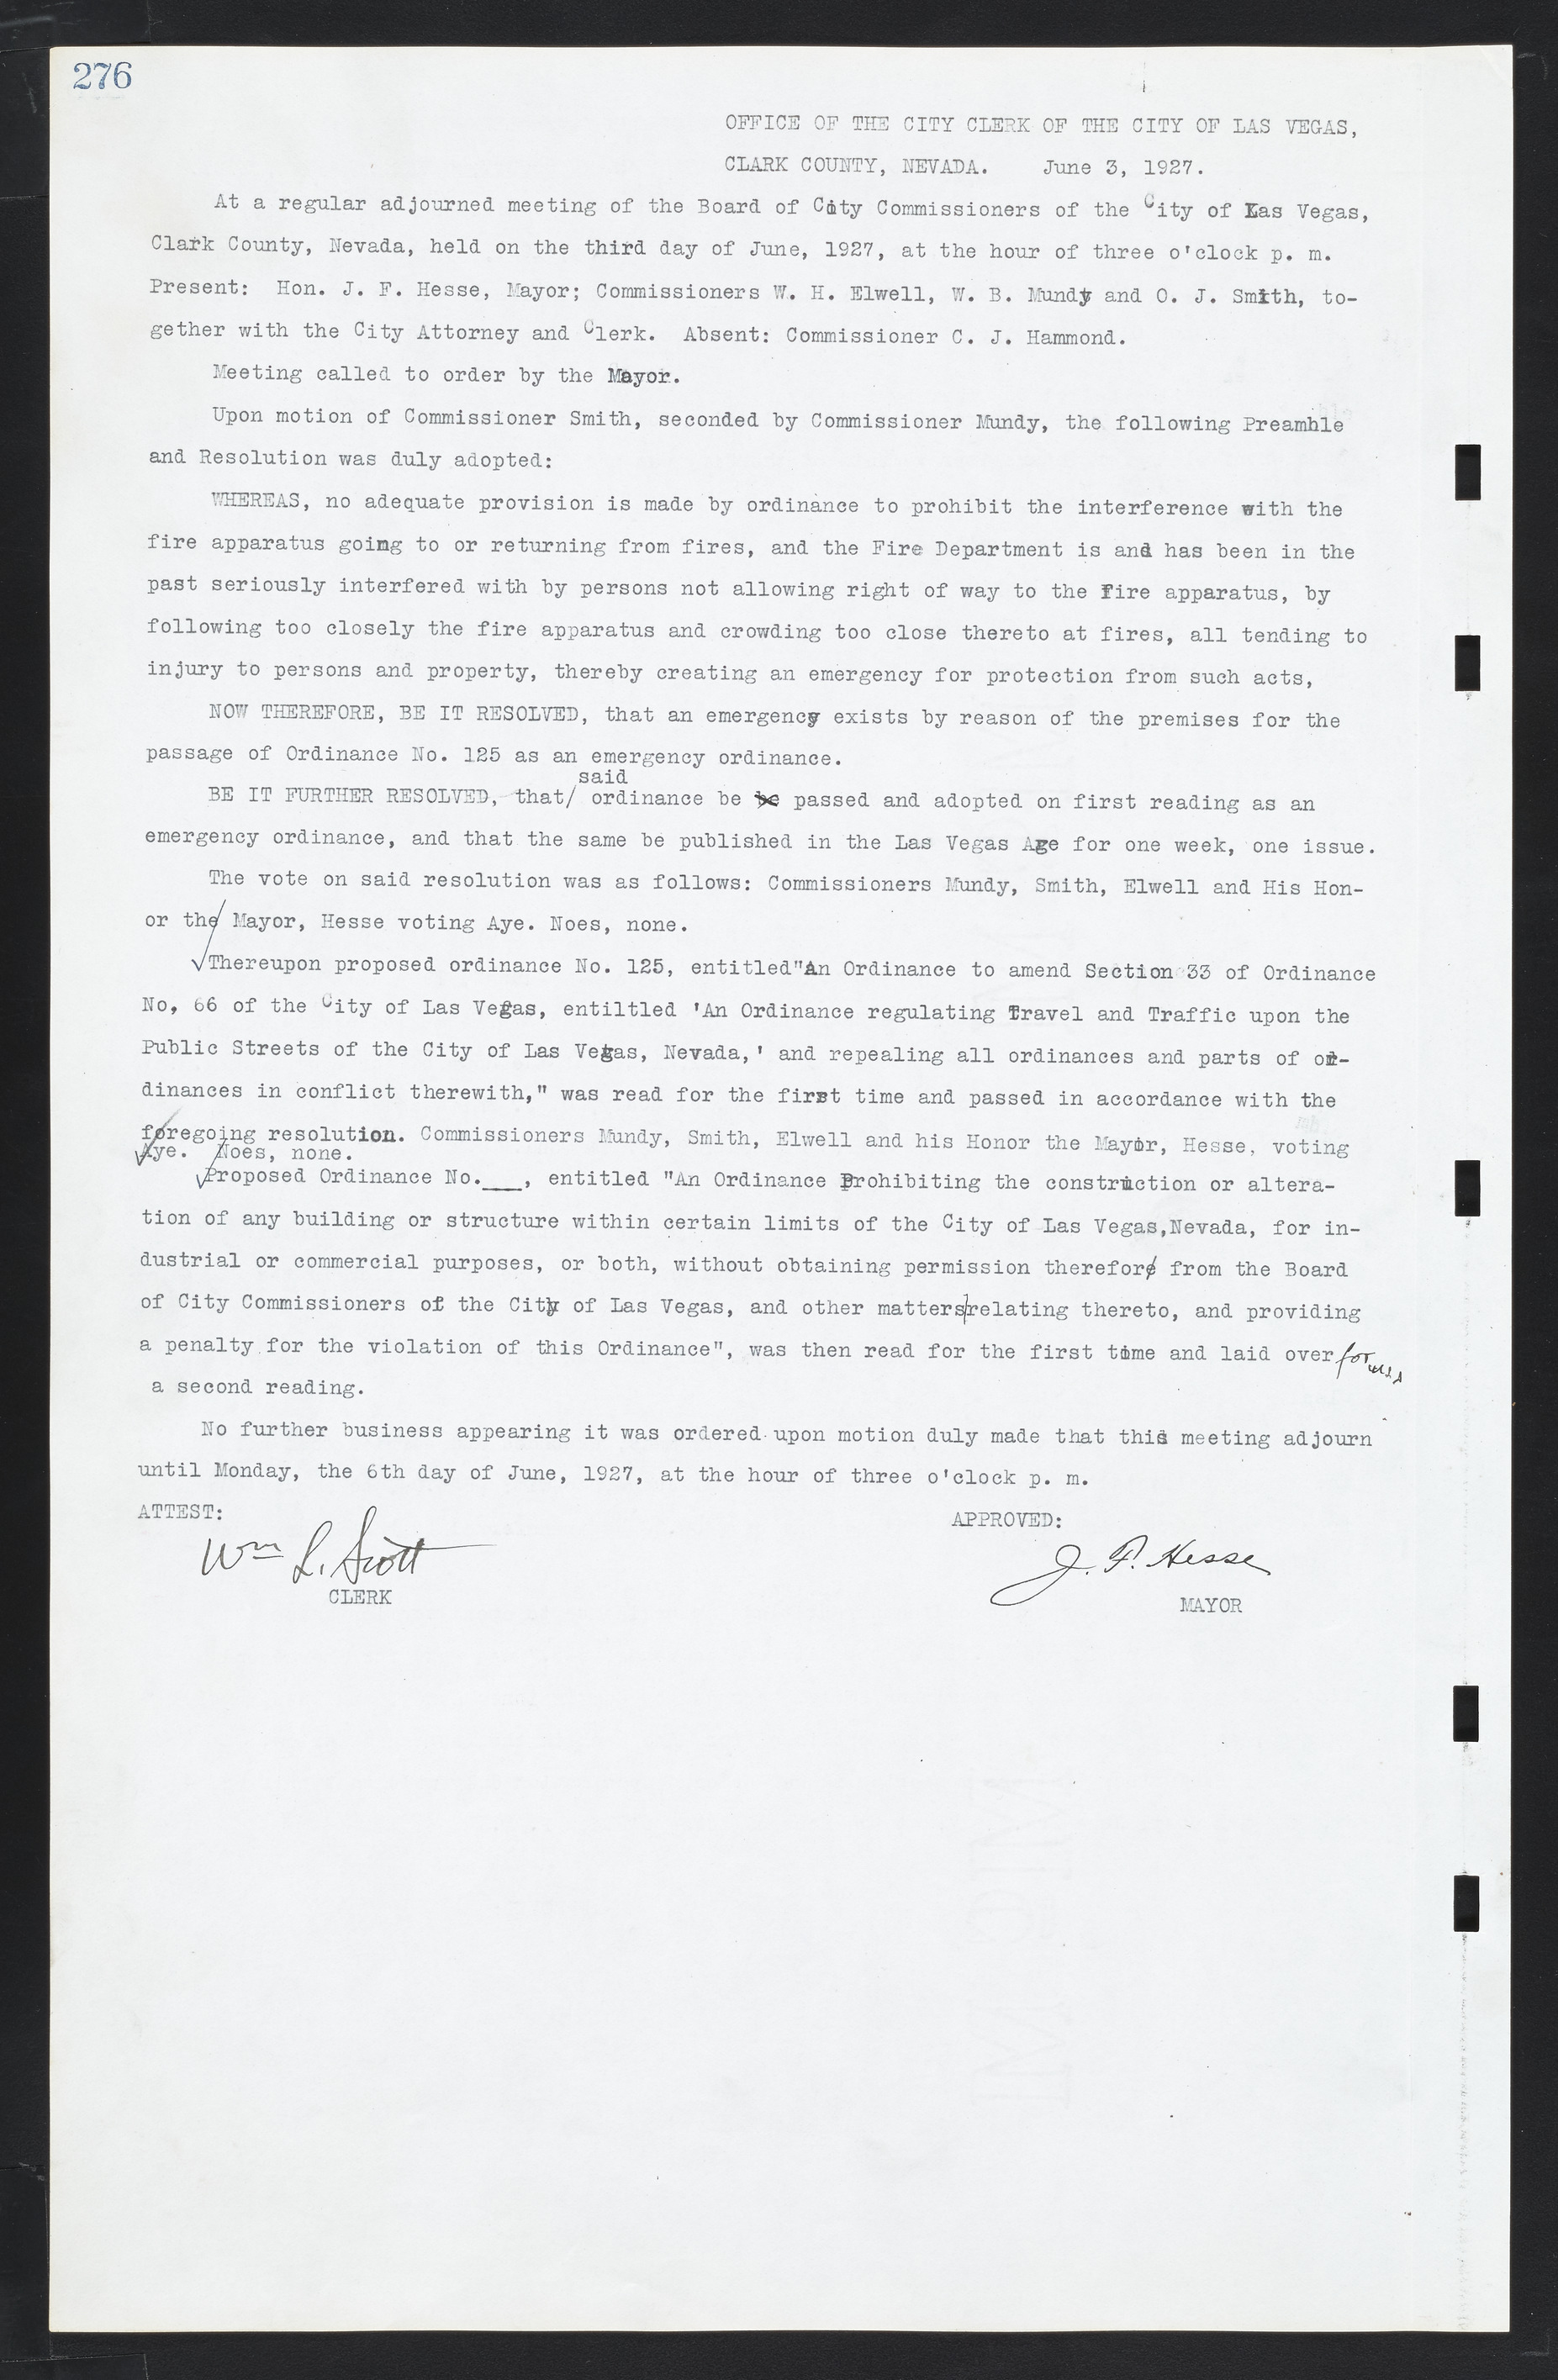 Las Vegas City Commission Minutes, March 1, 1922 to May 10, 1929, lvc000002-285